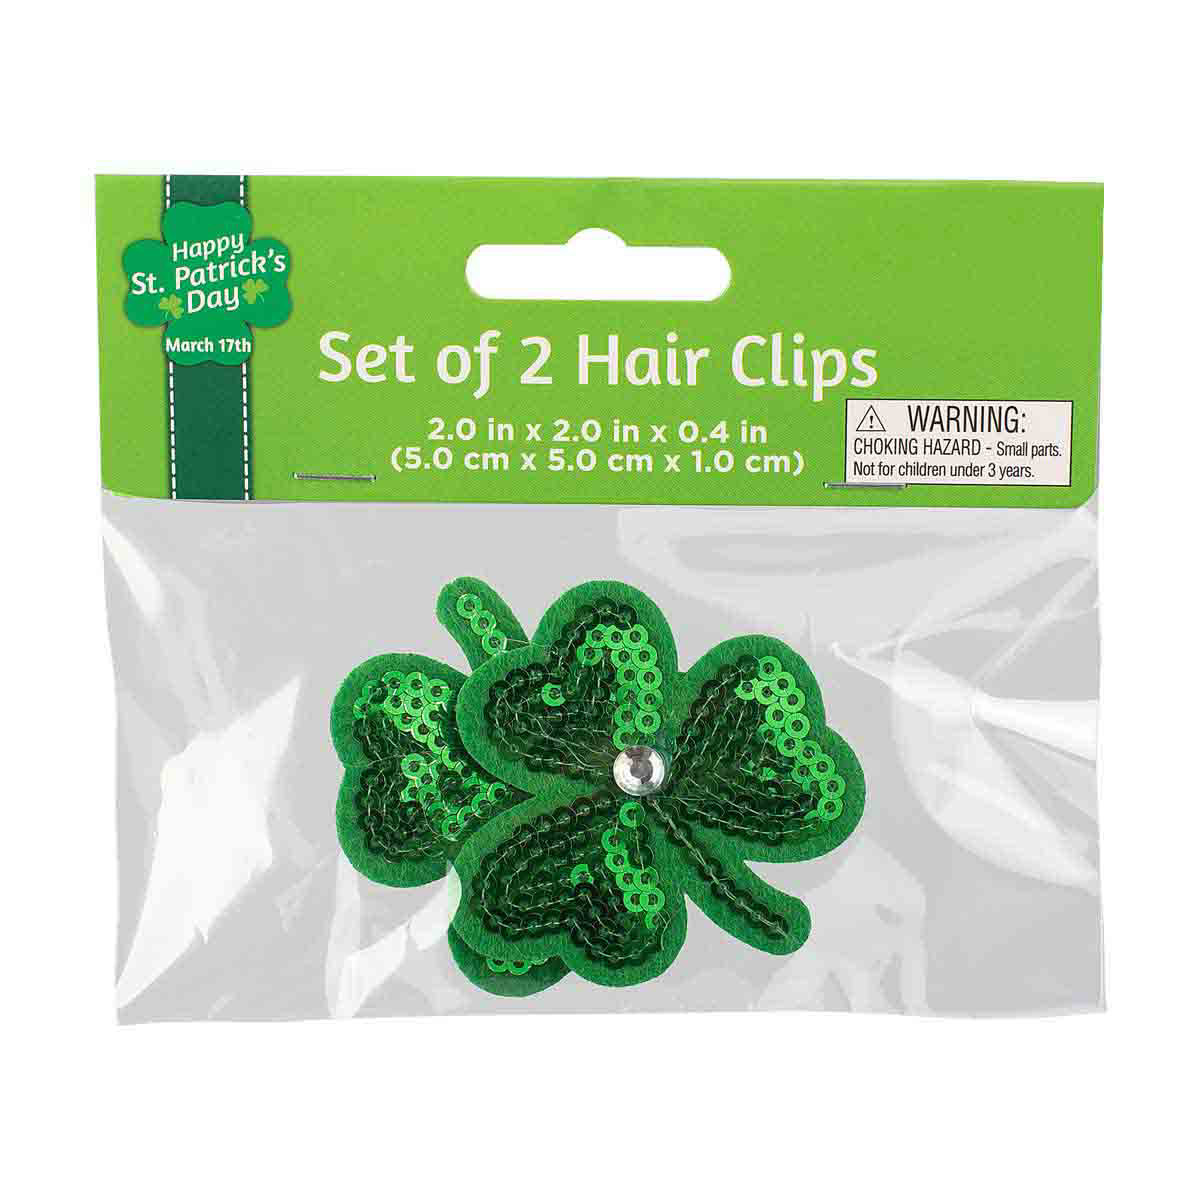 Happy St. Patrick's Day Clover Hair Clips, Set of 2